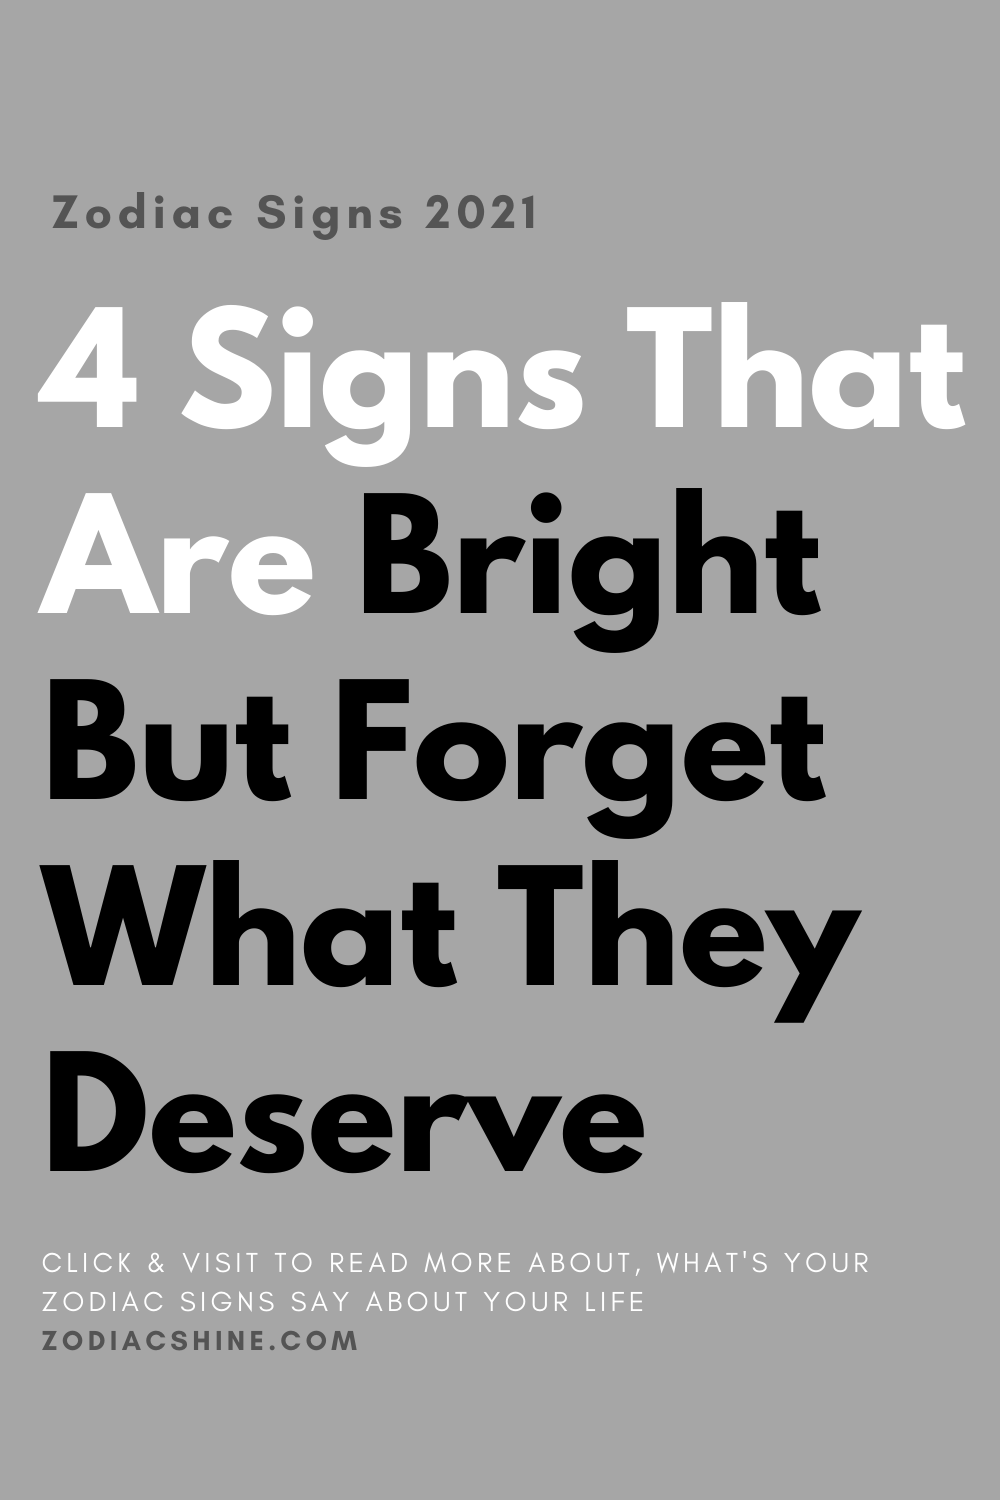 4 Signs That Are Bright But Forget What They Deserve